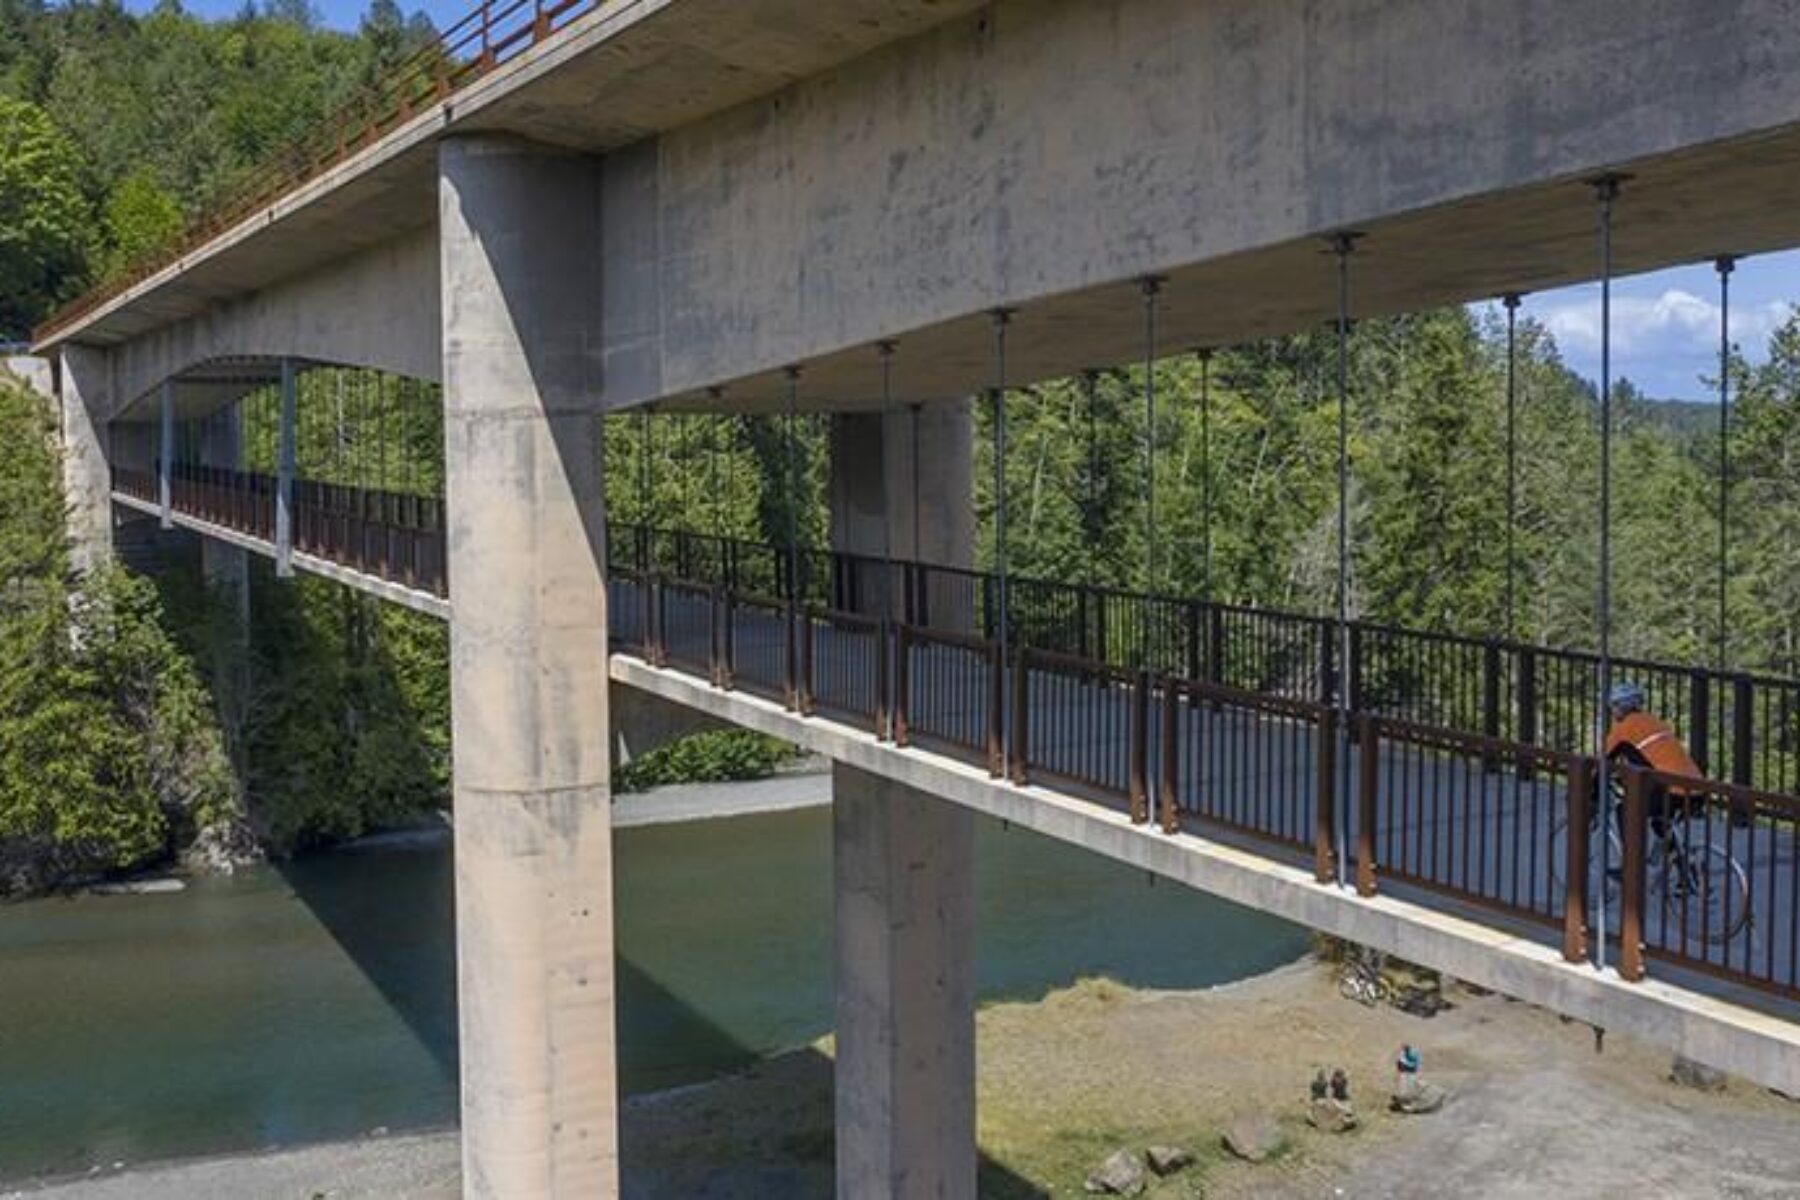 The Elwha River Bridge in Port Angeles along the Olympic Discovery Trail has two decks—one for vehicles and one (below it) for pedestrians and bicyclists. | Photo by John Gussman